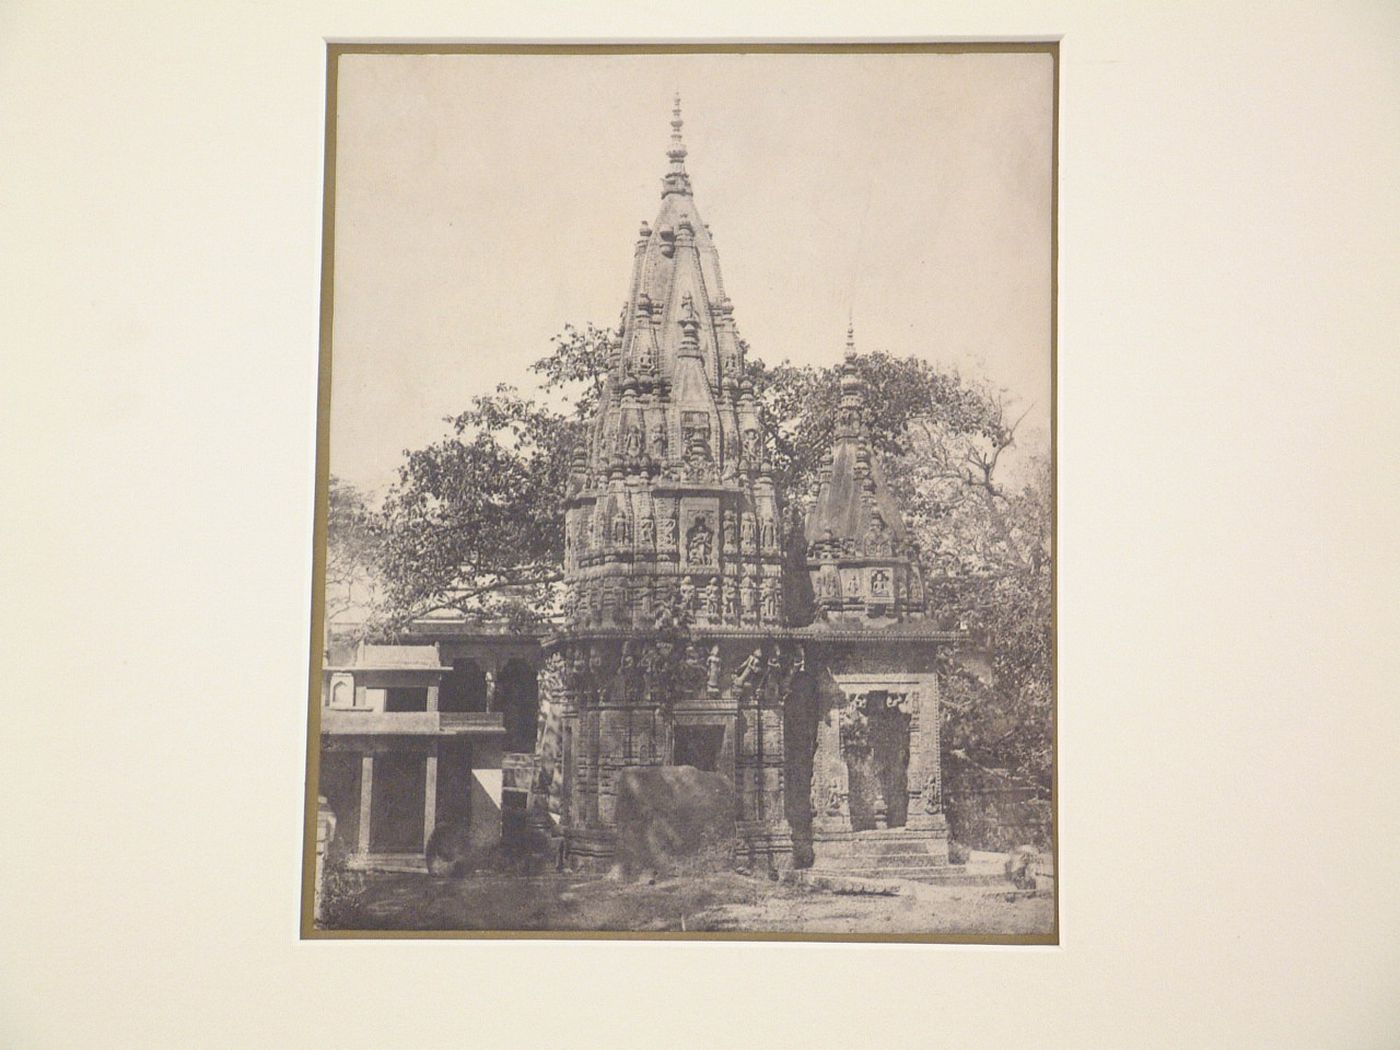 View of a Hindu temple, Mirzapur, India